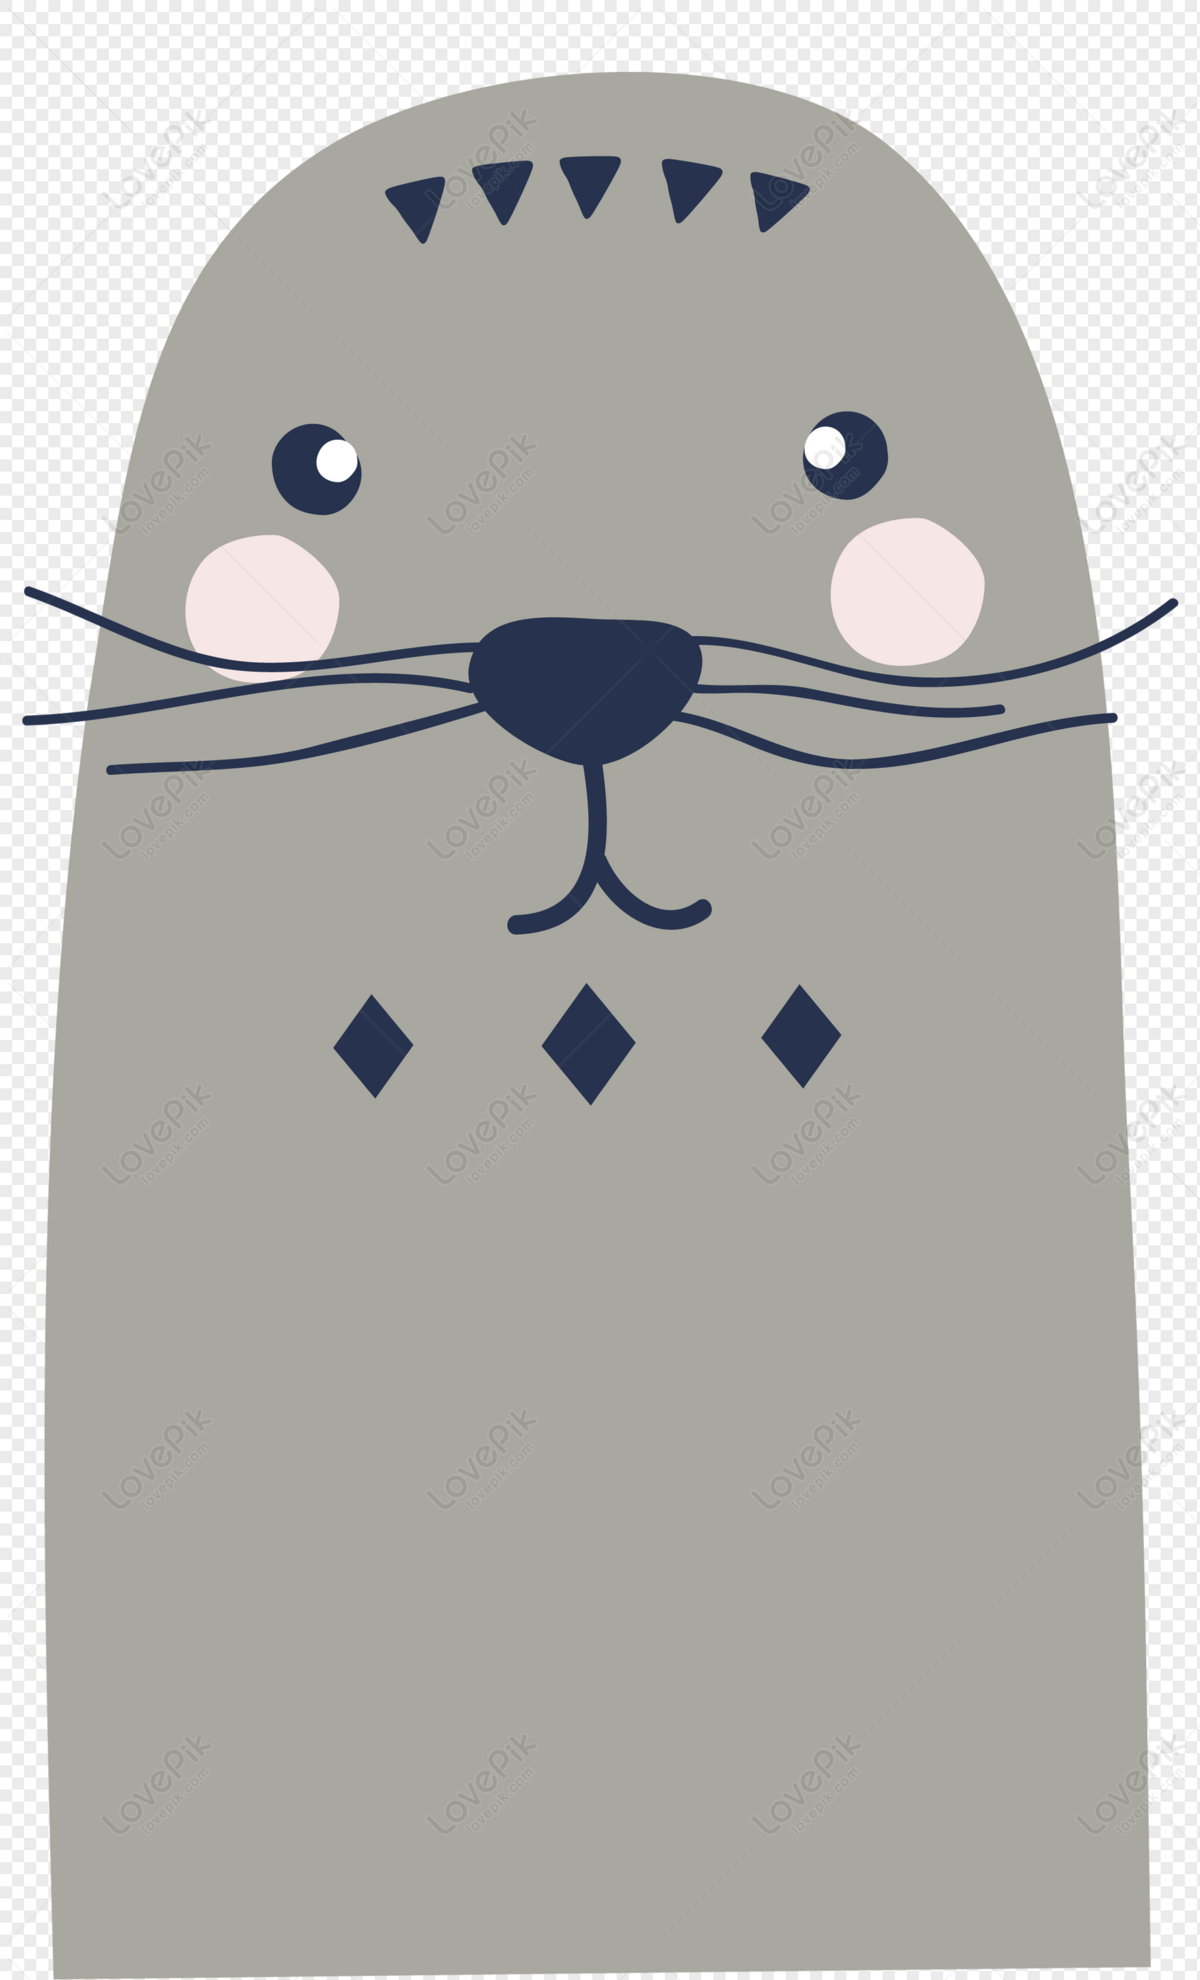 Cartoon Sea Lion PNG Image And Clipart Image For Free Download - Lovepik |  400268338